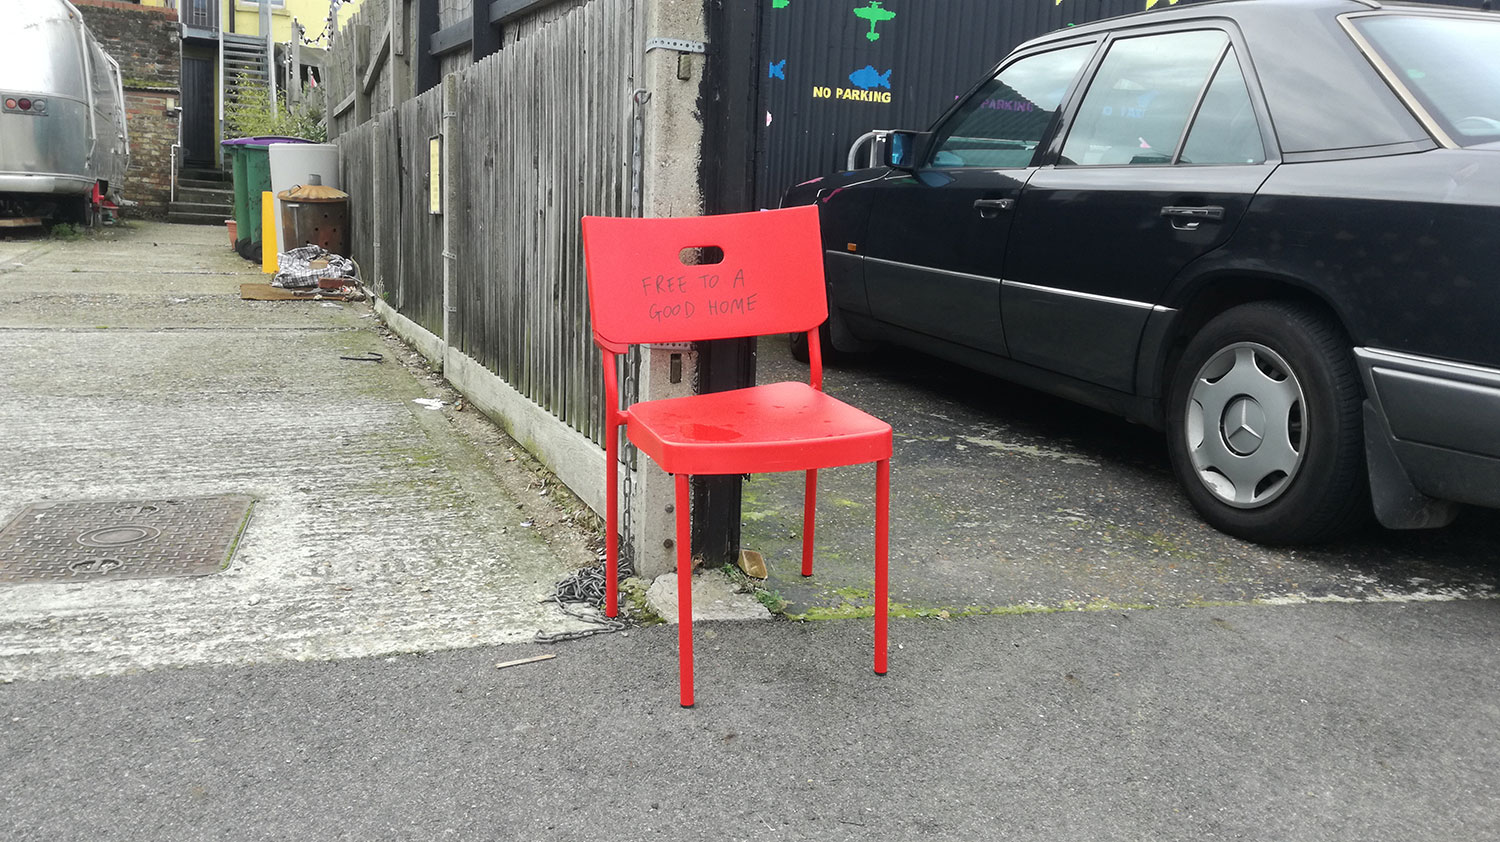 #008 - Media: Marker pen on red chair.